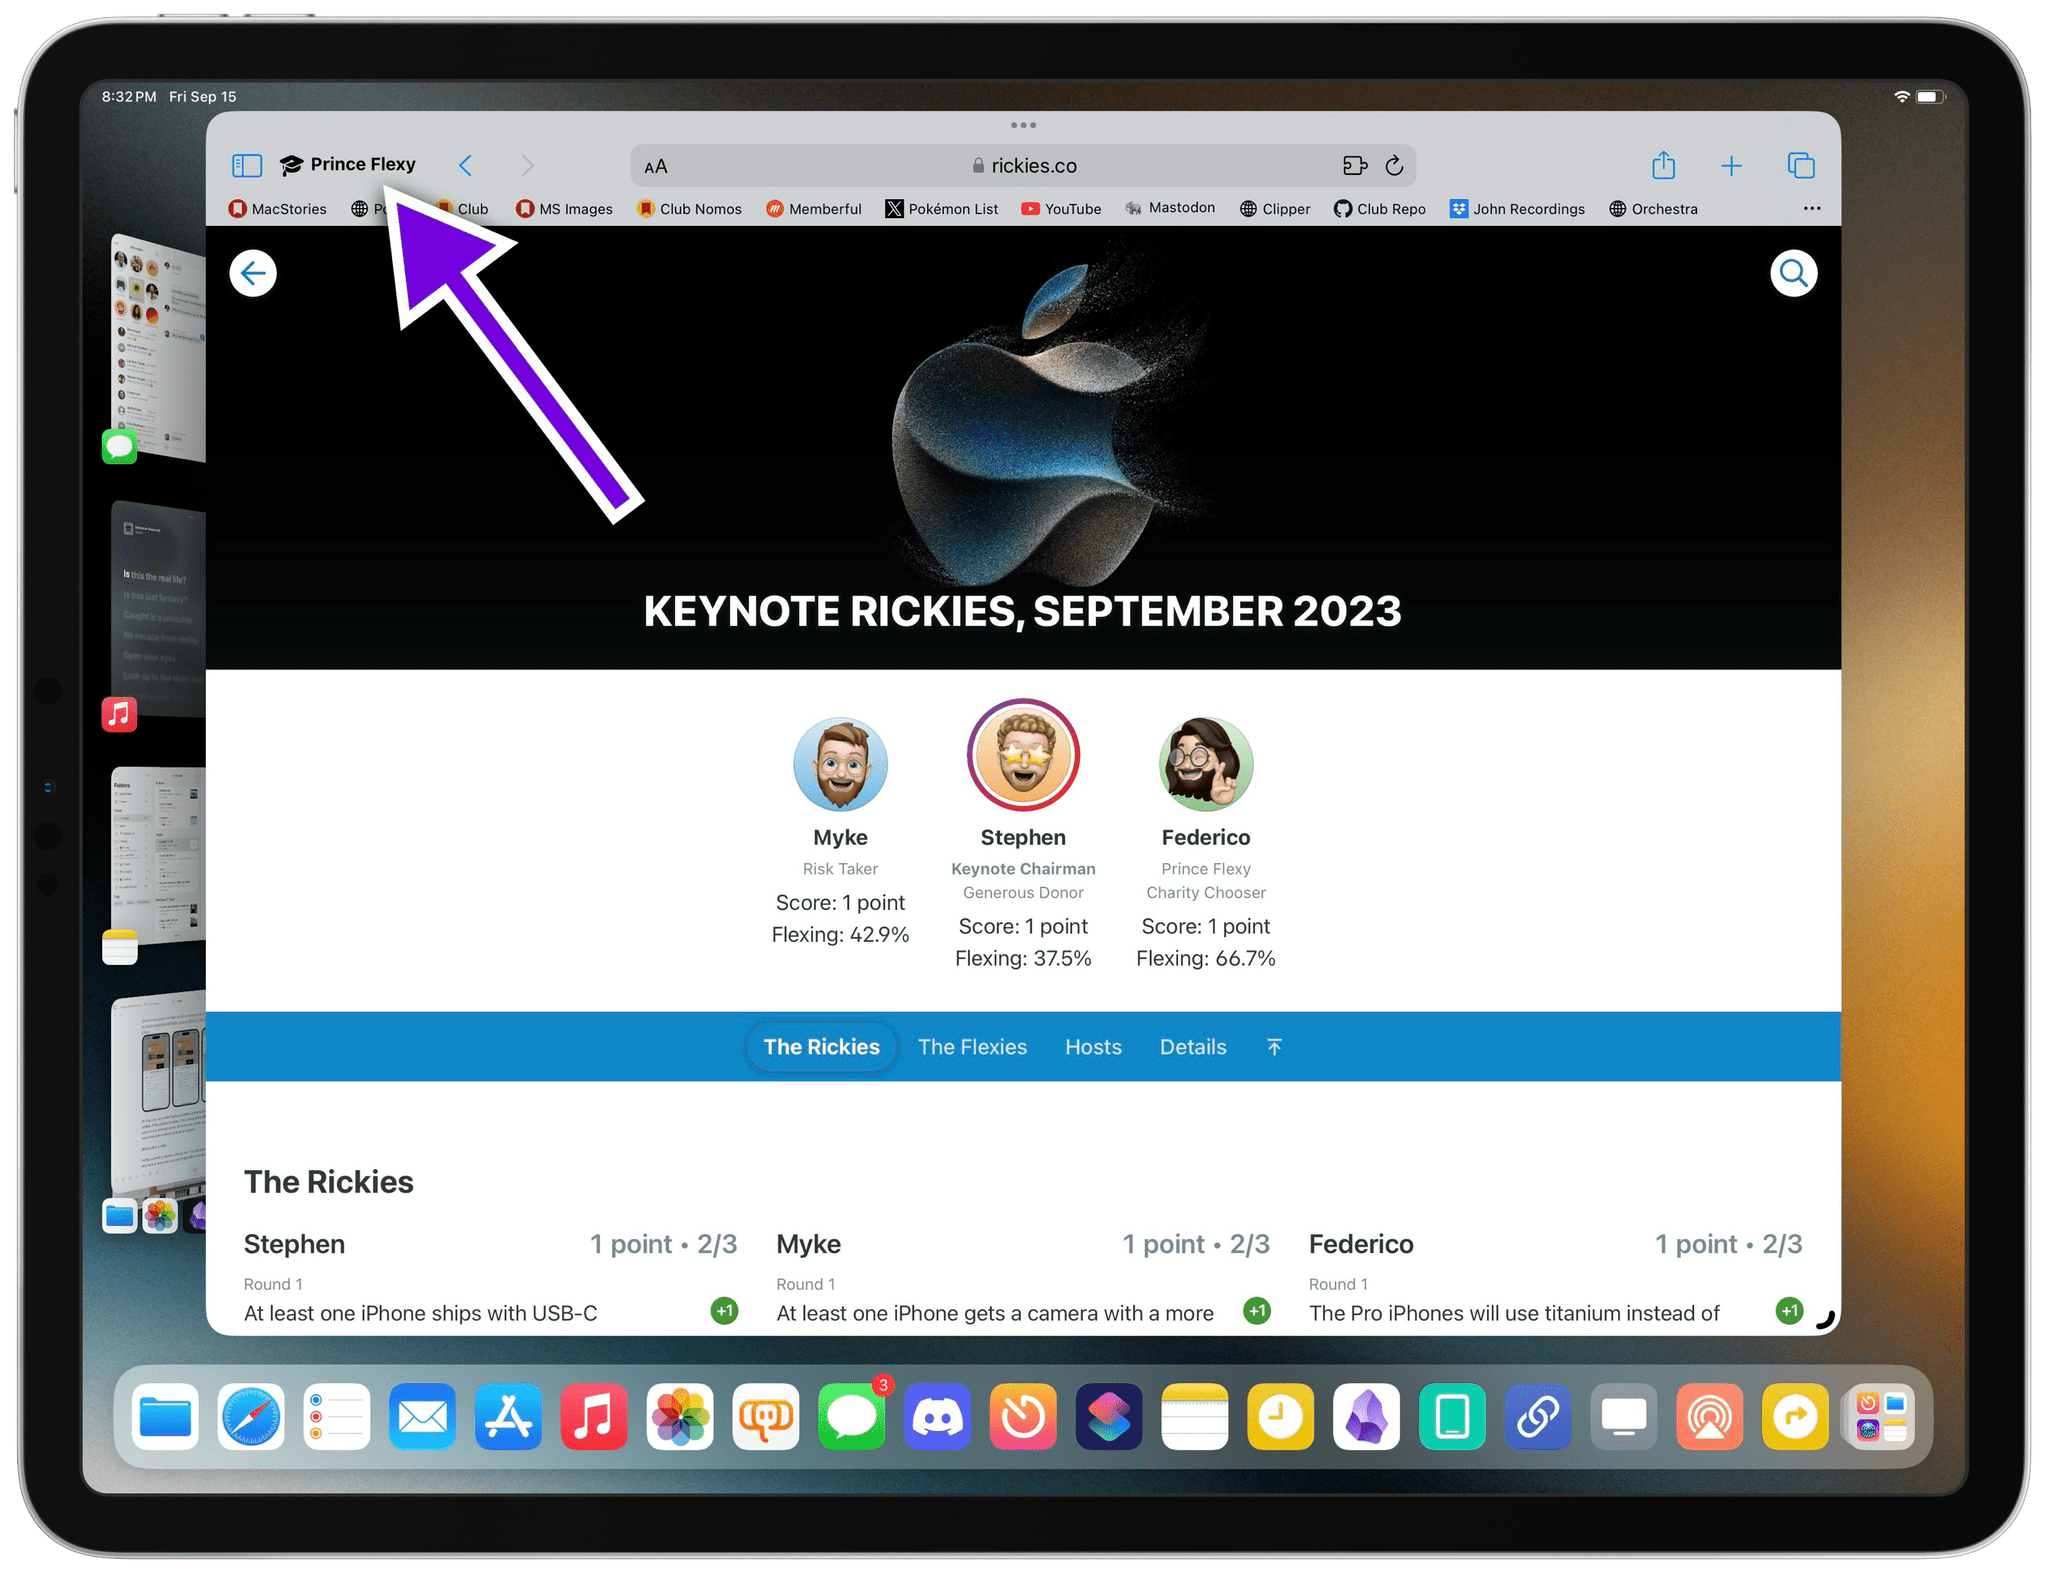 Switching between profiles on iPad can be done from this button or at the bottom of the left sidebar.